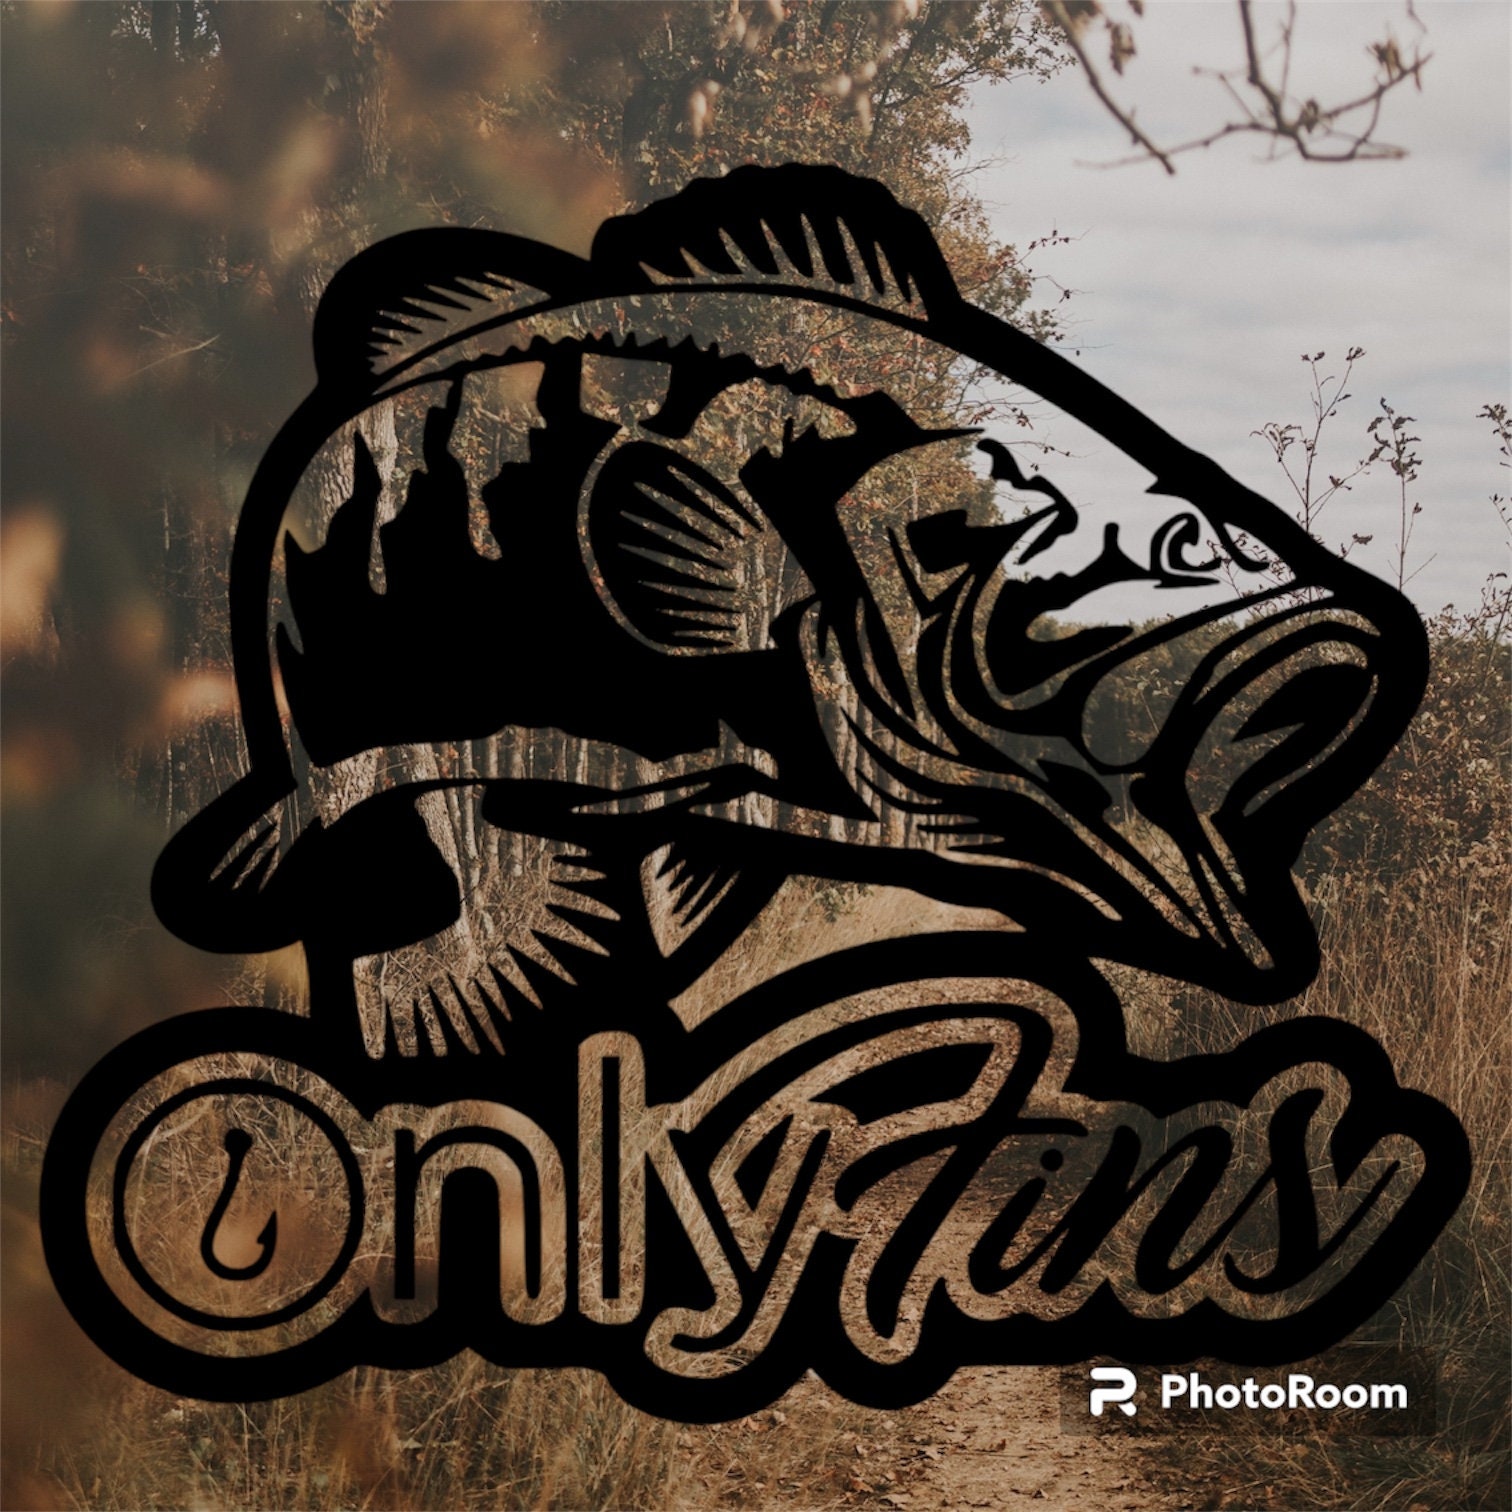 Only Fins Bass Decal | Fishing Decal | Bass Fishing | Truck Decals | Window  Decal | Permanent Vinyl